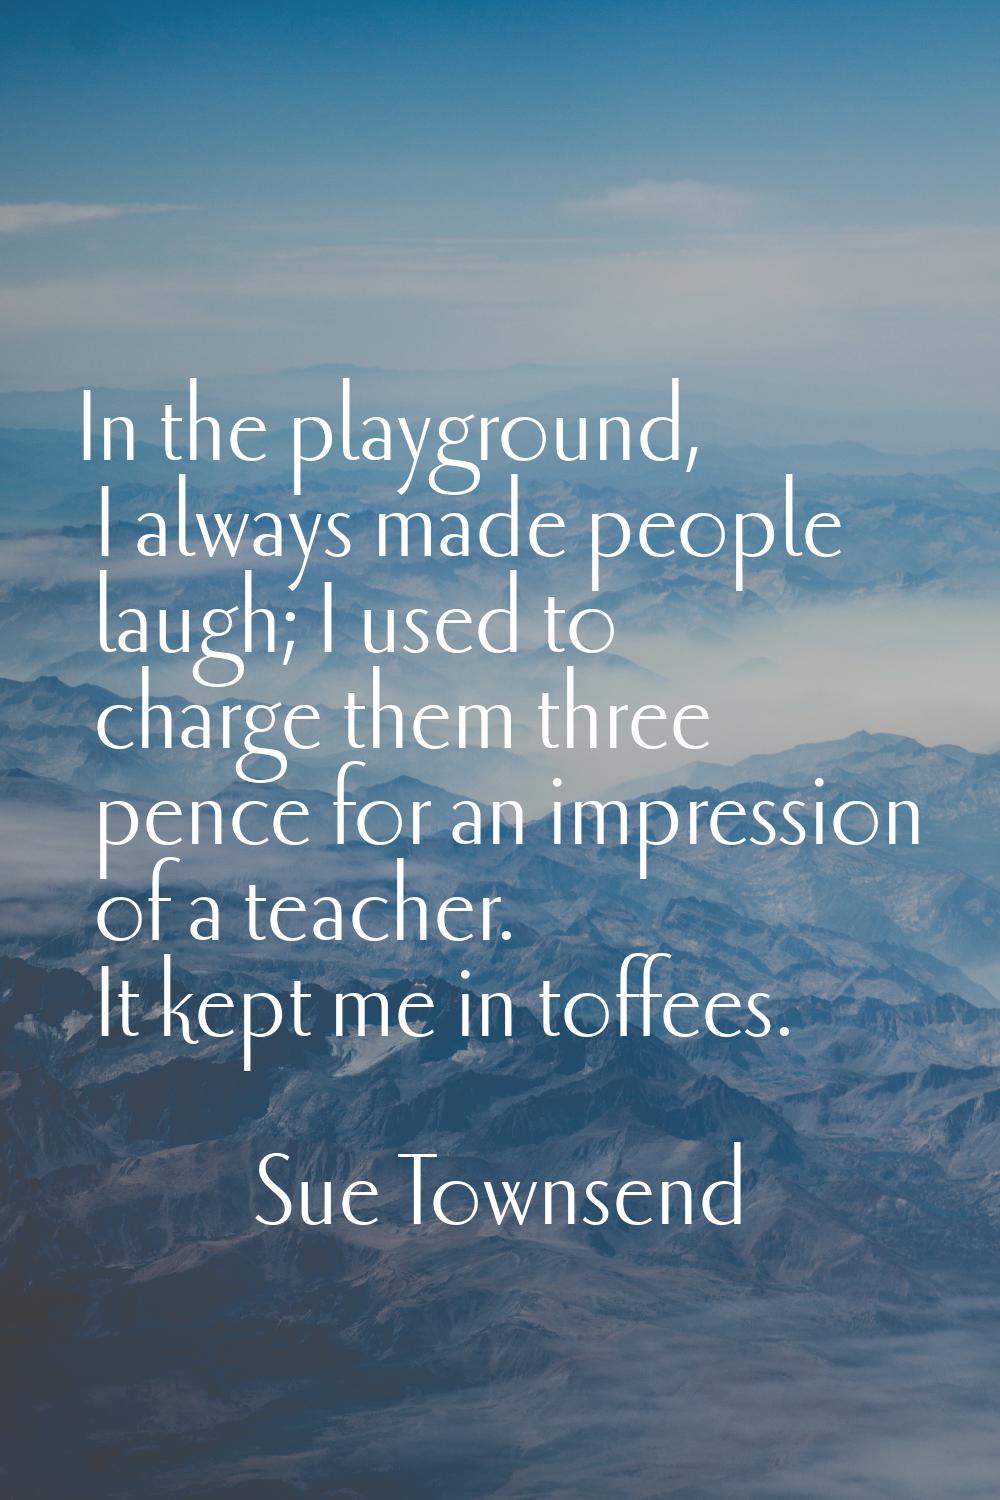 In the playground, I always made people laugh; I used to charge them three pence for an impression 